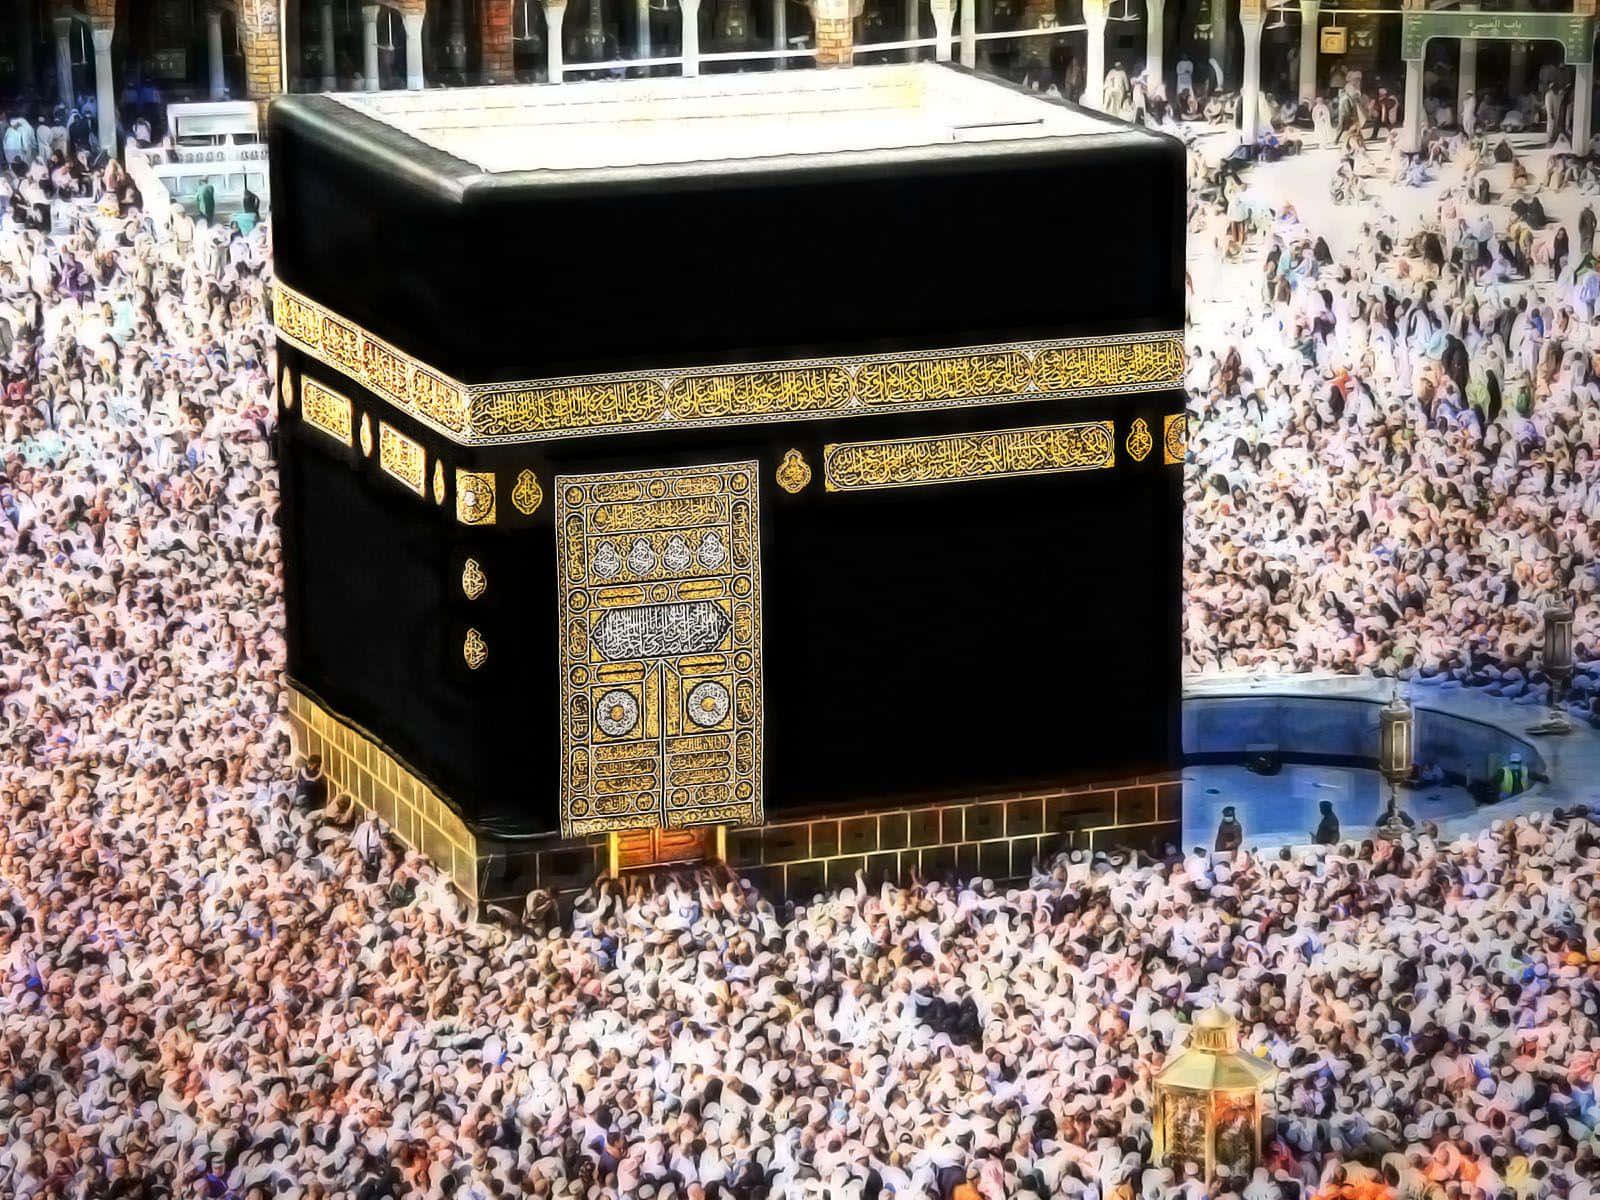 A Large Crowd Of People Around A Kaaba